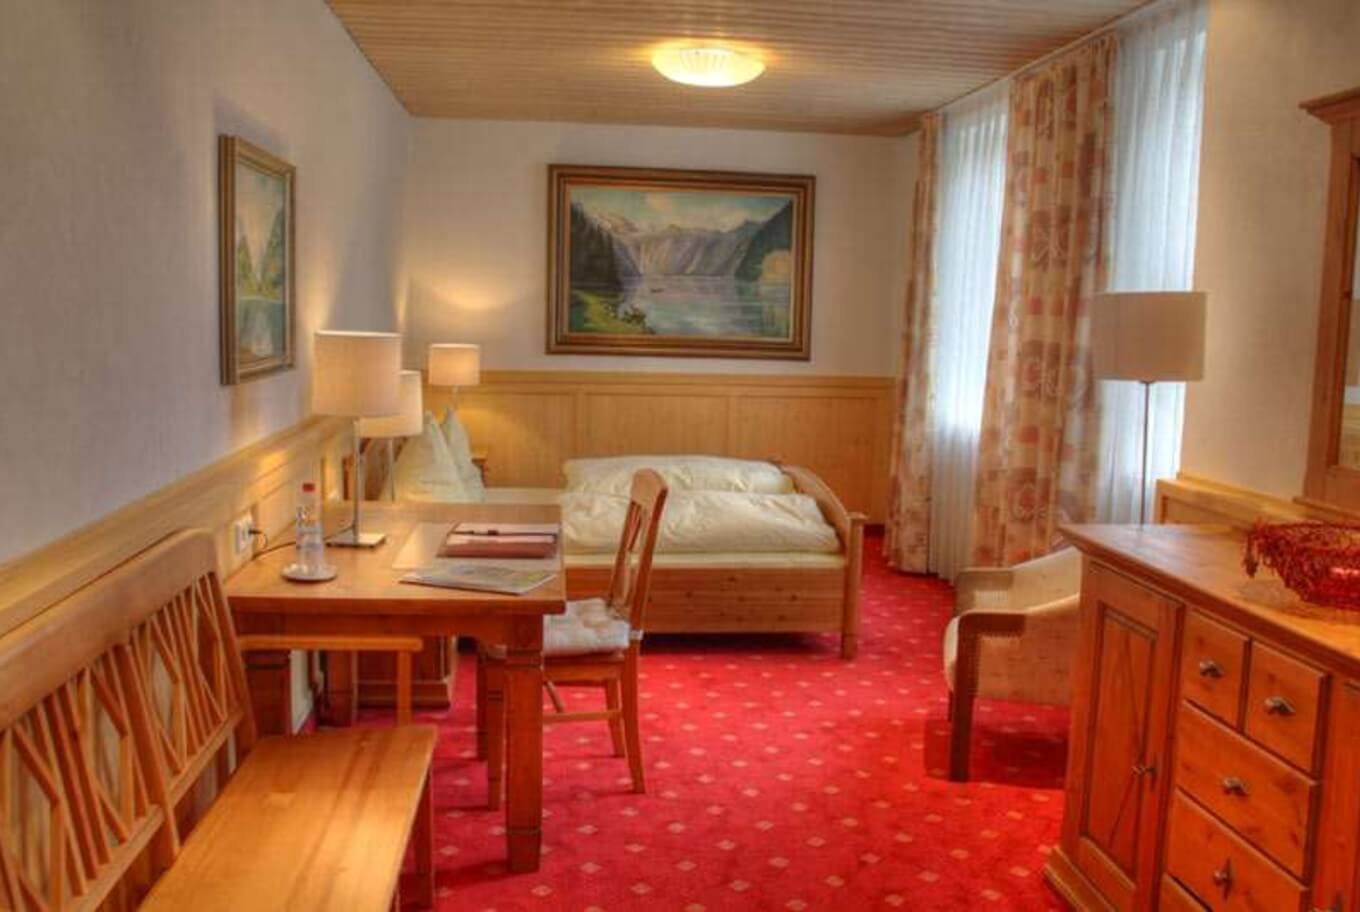 Secure deals now! Book your next overnight stay at Hotel Marktoberdorf.